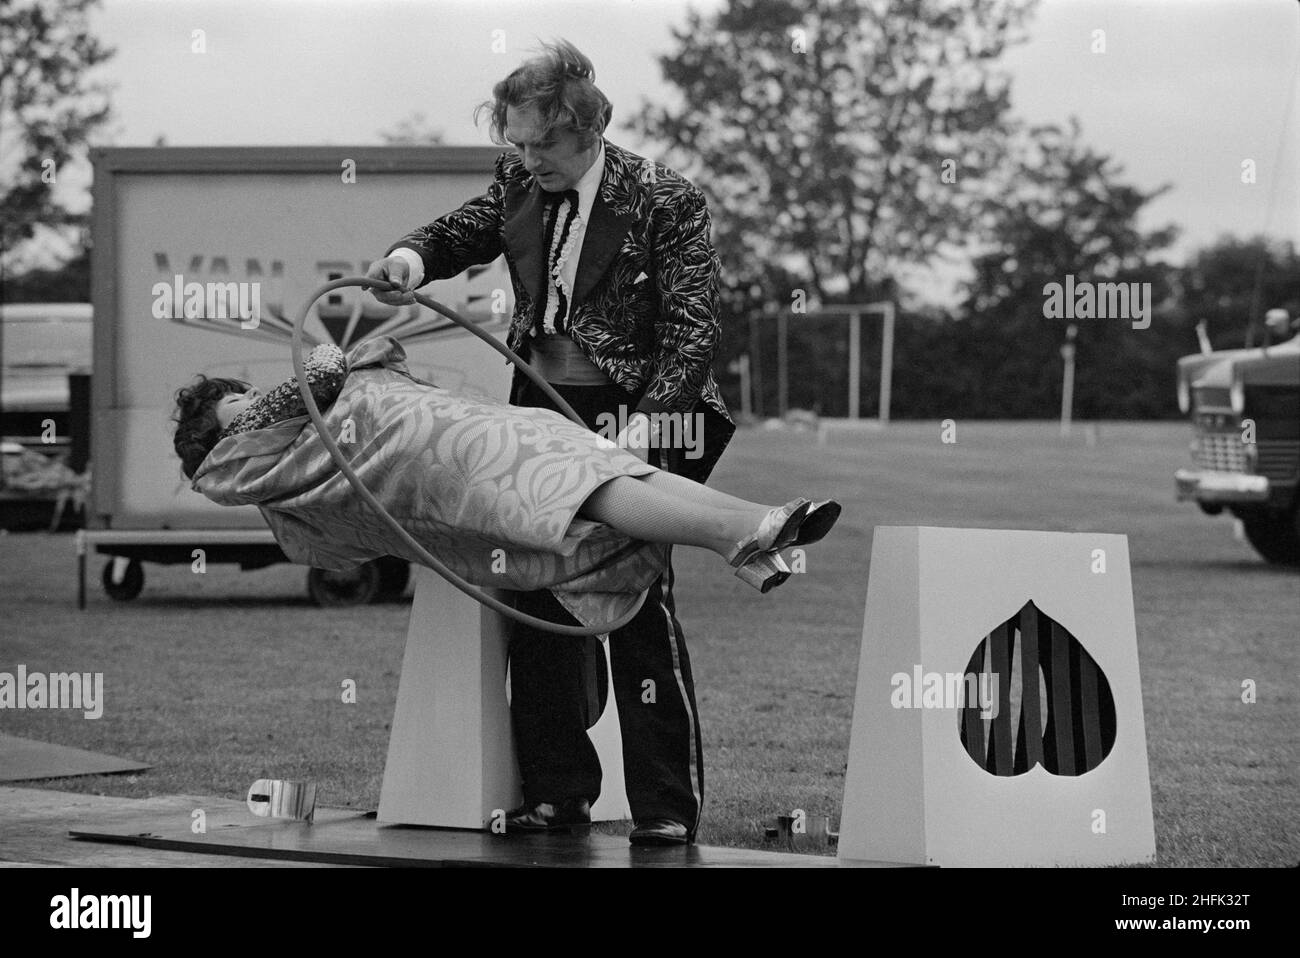 Laing Sports Ground, Rowley Lane, Elstree, Barnet, London, 18/06/1977. The illusionists Van Buren and Greta carrying out an act of levitation during the Jubilee Gala Day held at the Laing Sports Ground. Stock Photo